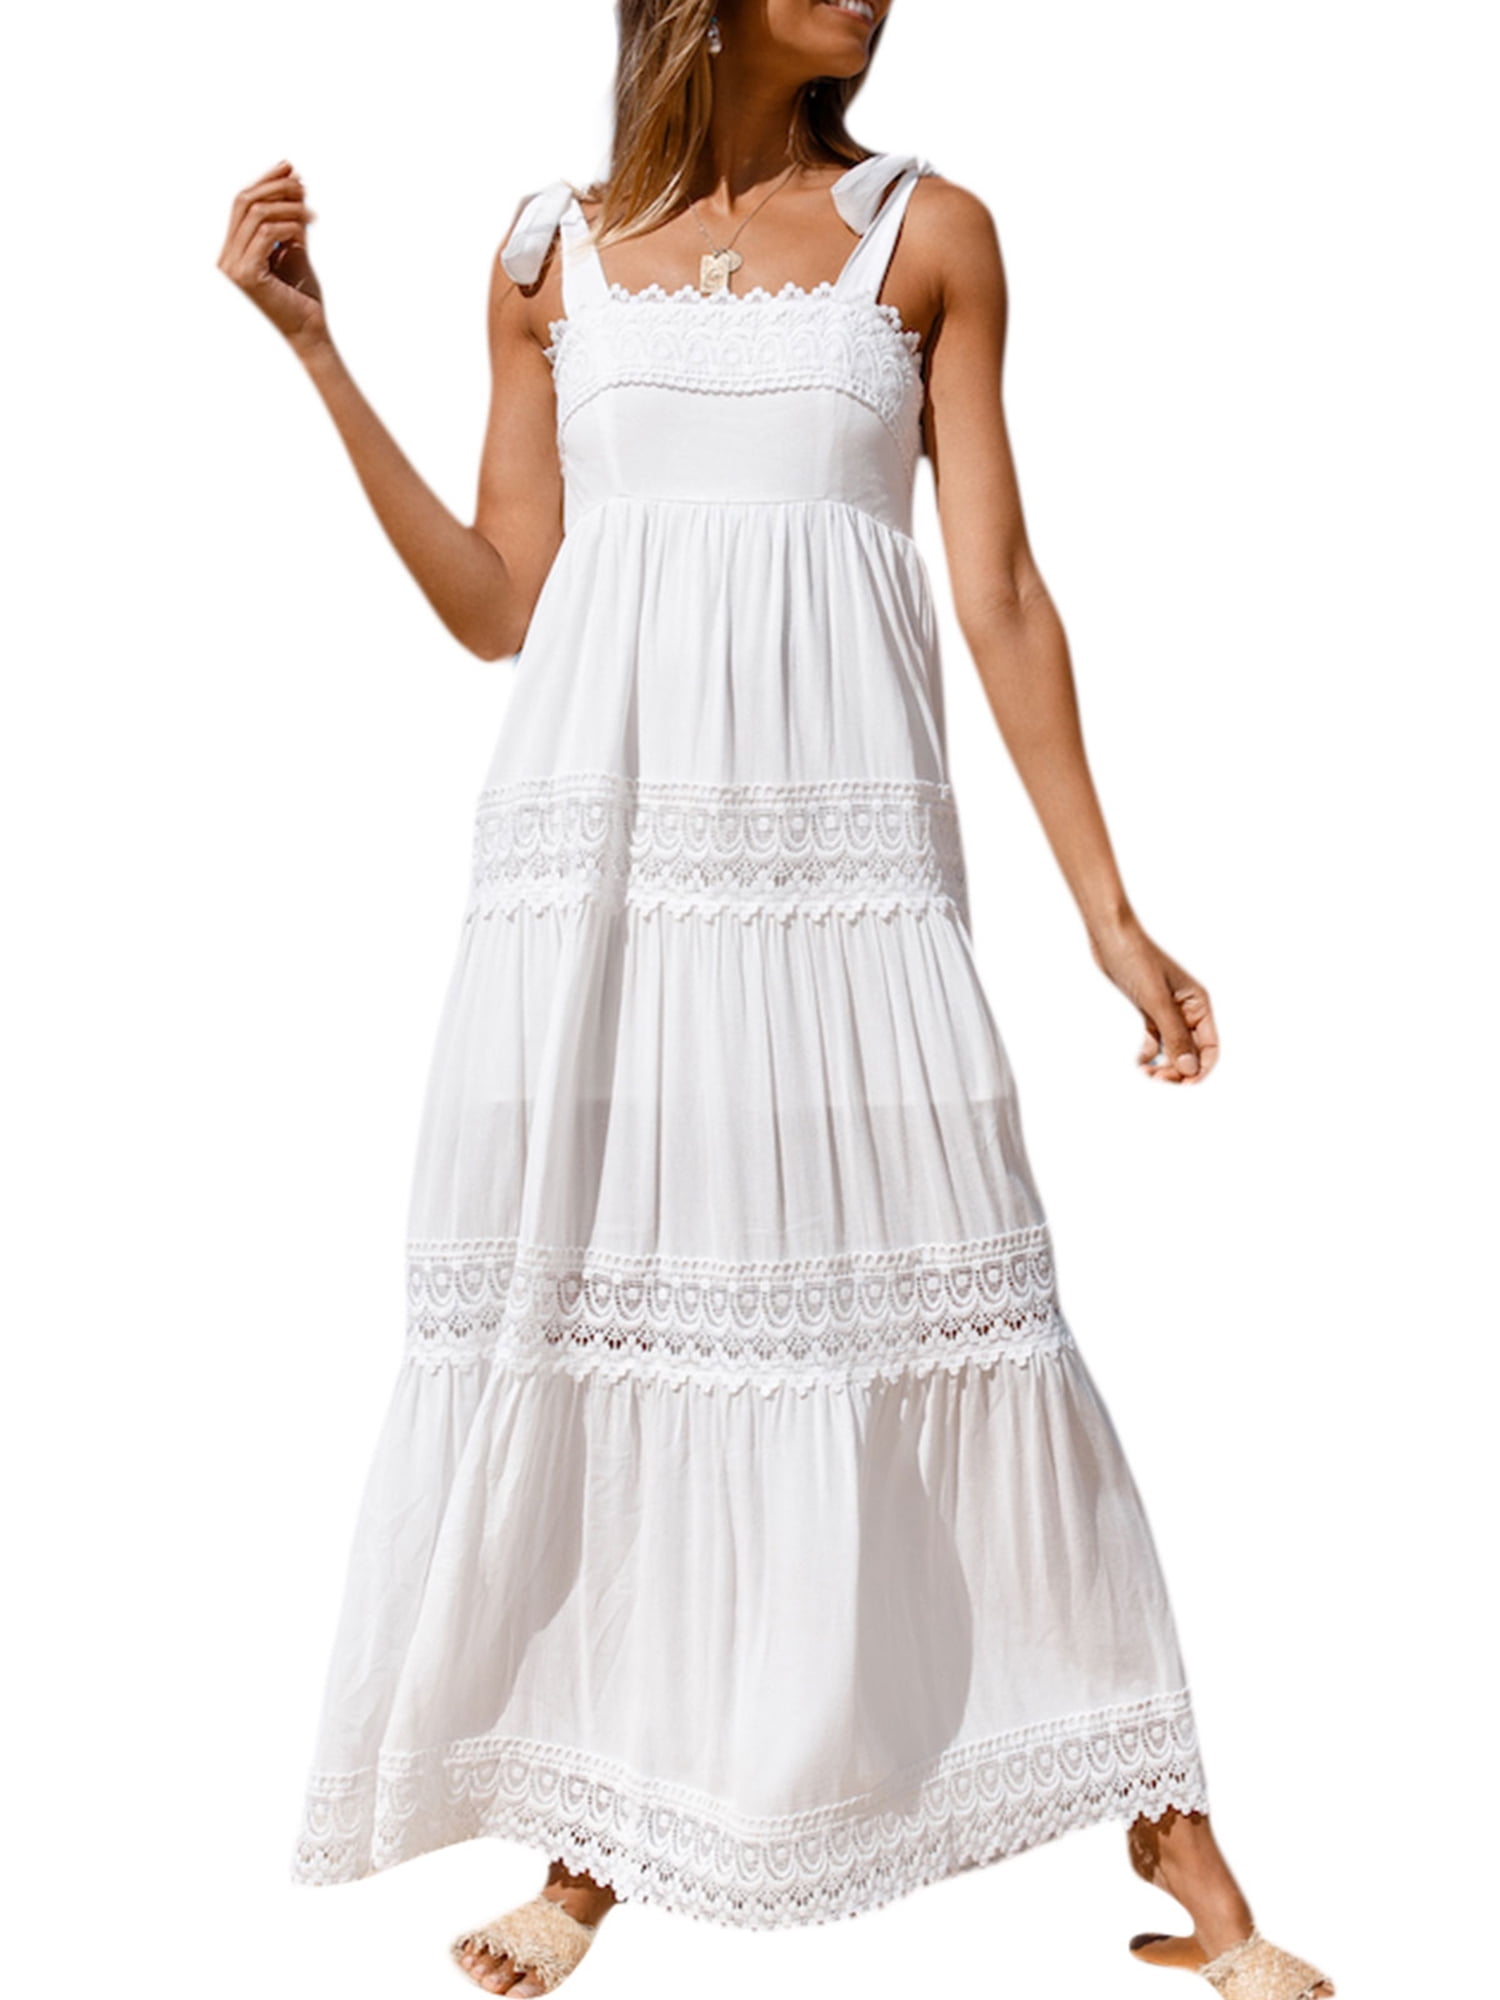 TFFR Women Maxi Dresses Summer Tie Square Neck Lace Splicing Smocked Tiered Long Dress Beach Sundress (Small, White) - Walmart.com